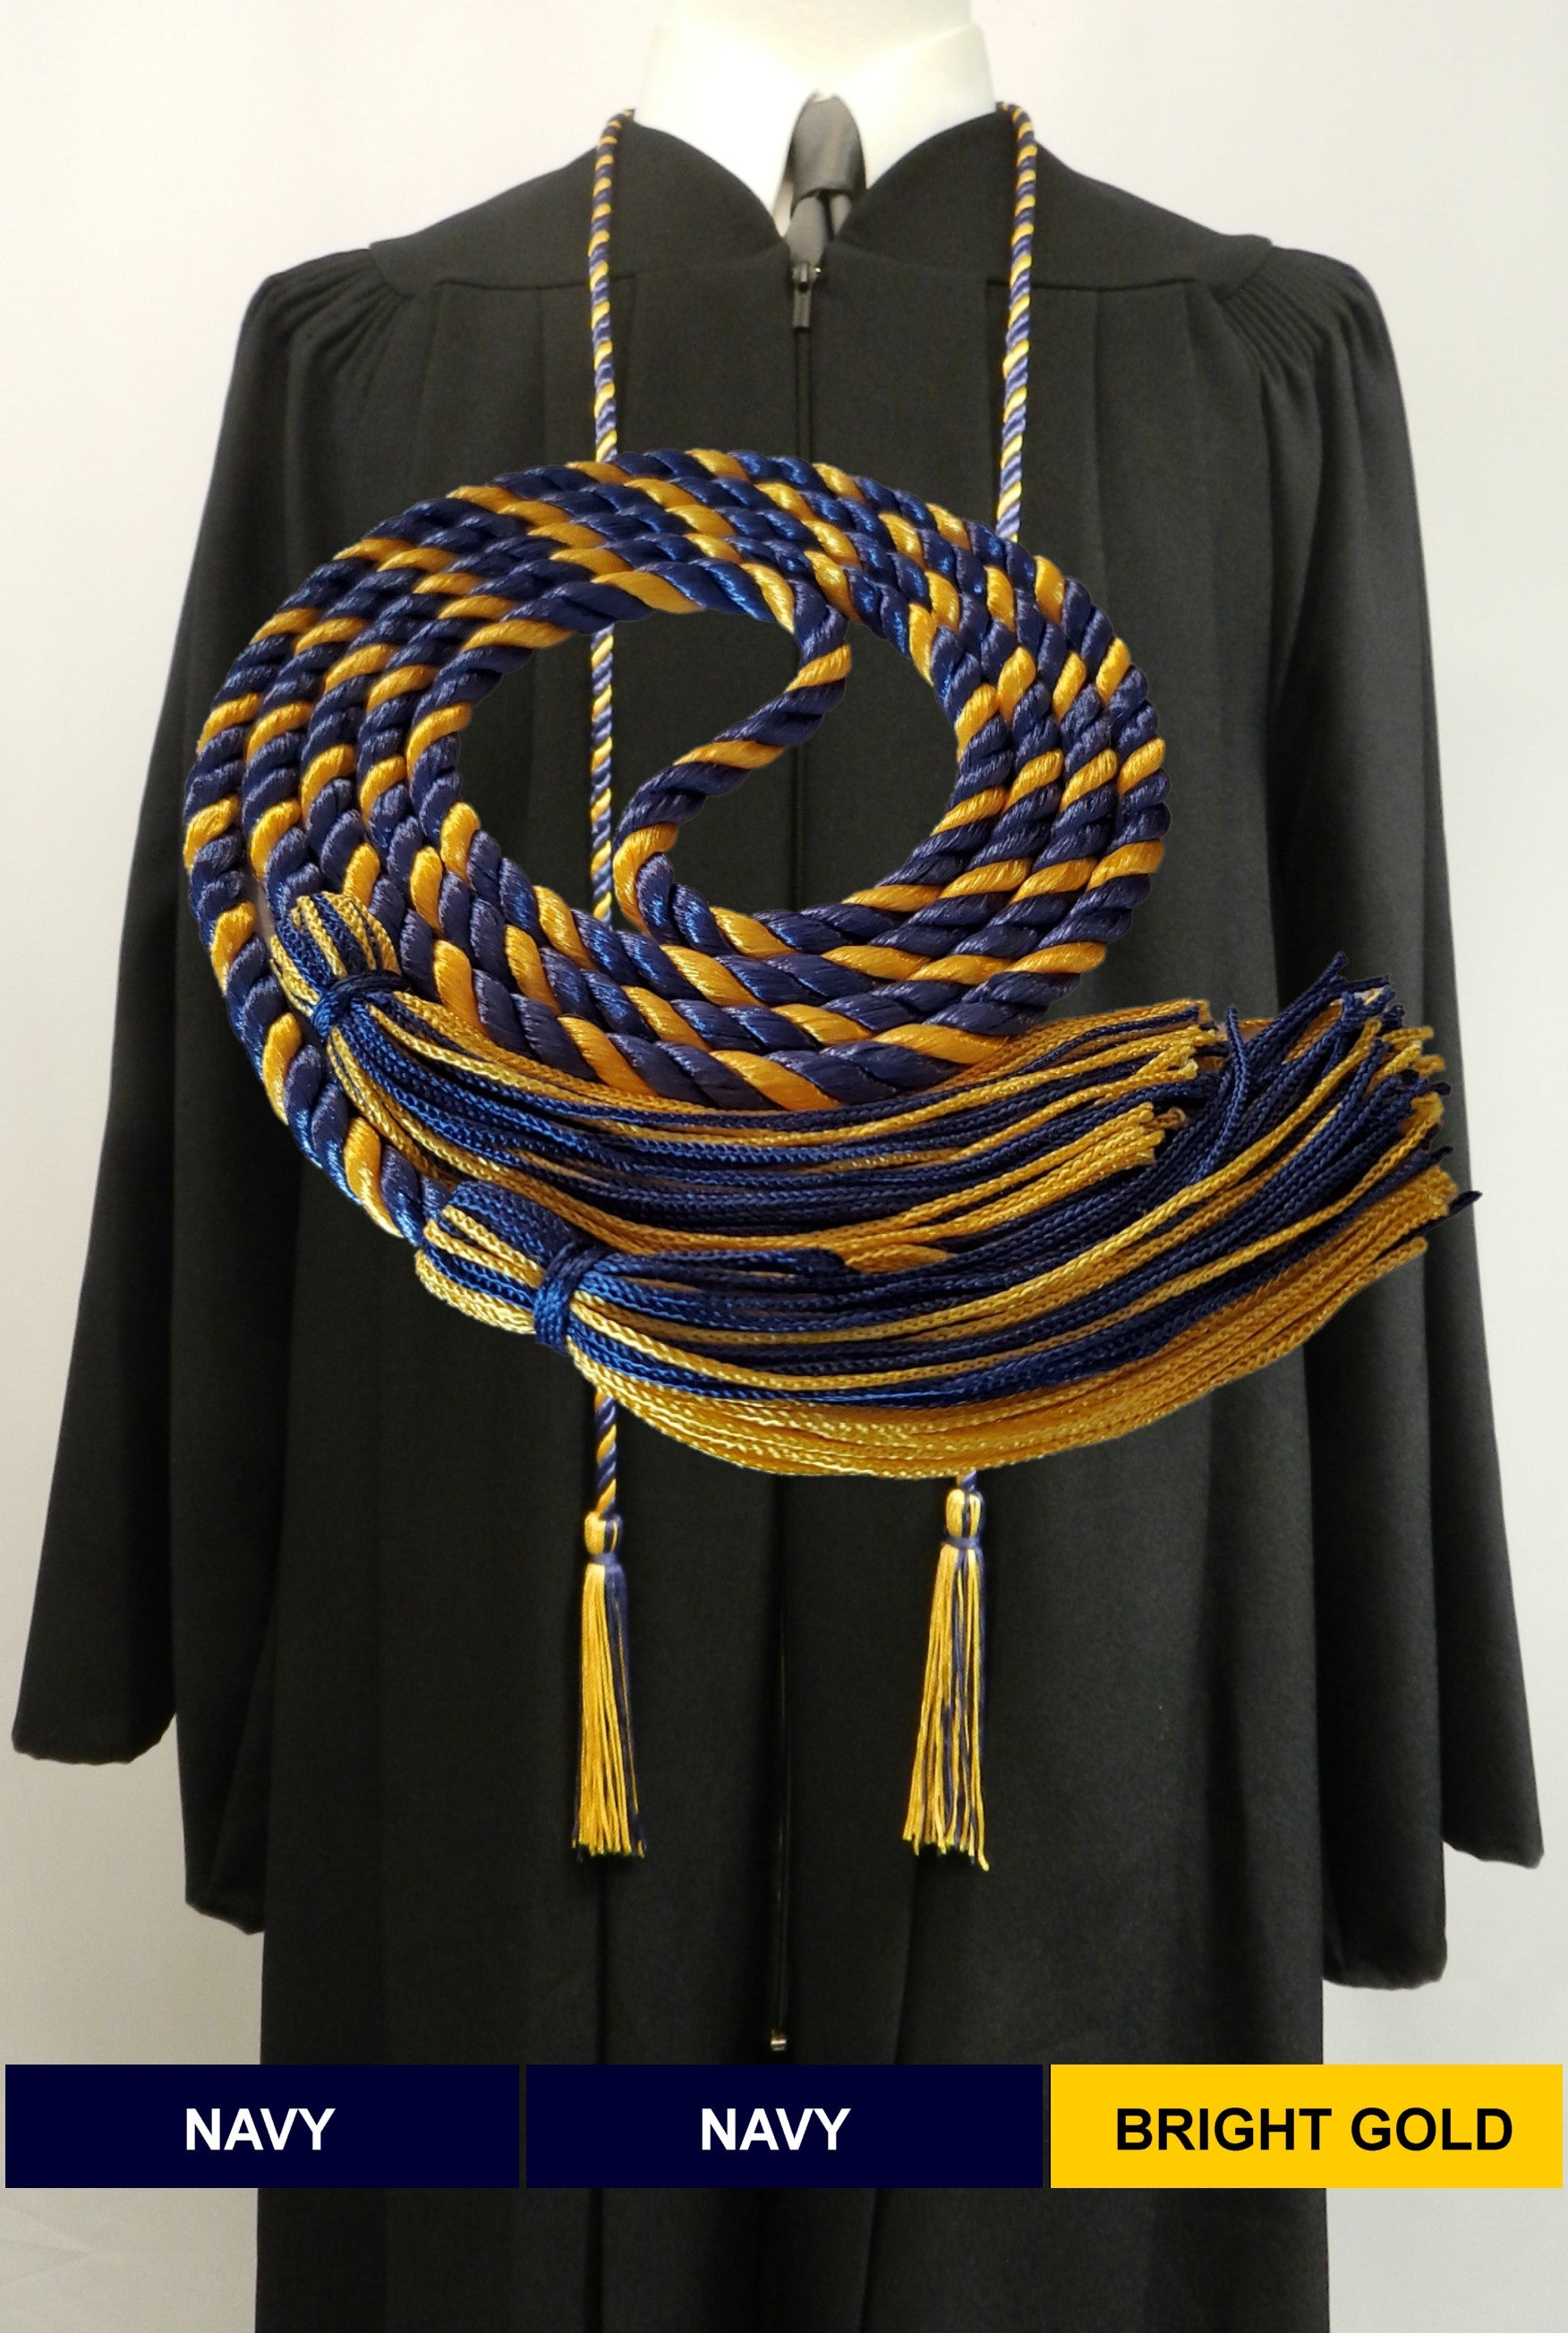 Buy Golden Satin Faculty Graduation Gown at Amazon.in